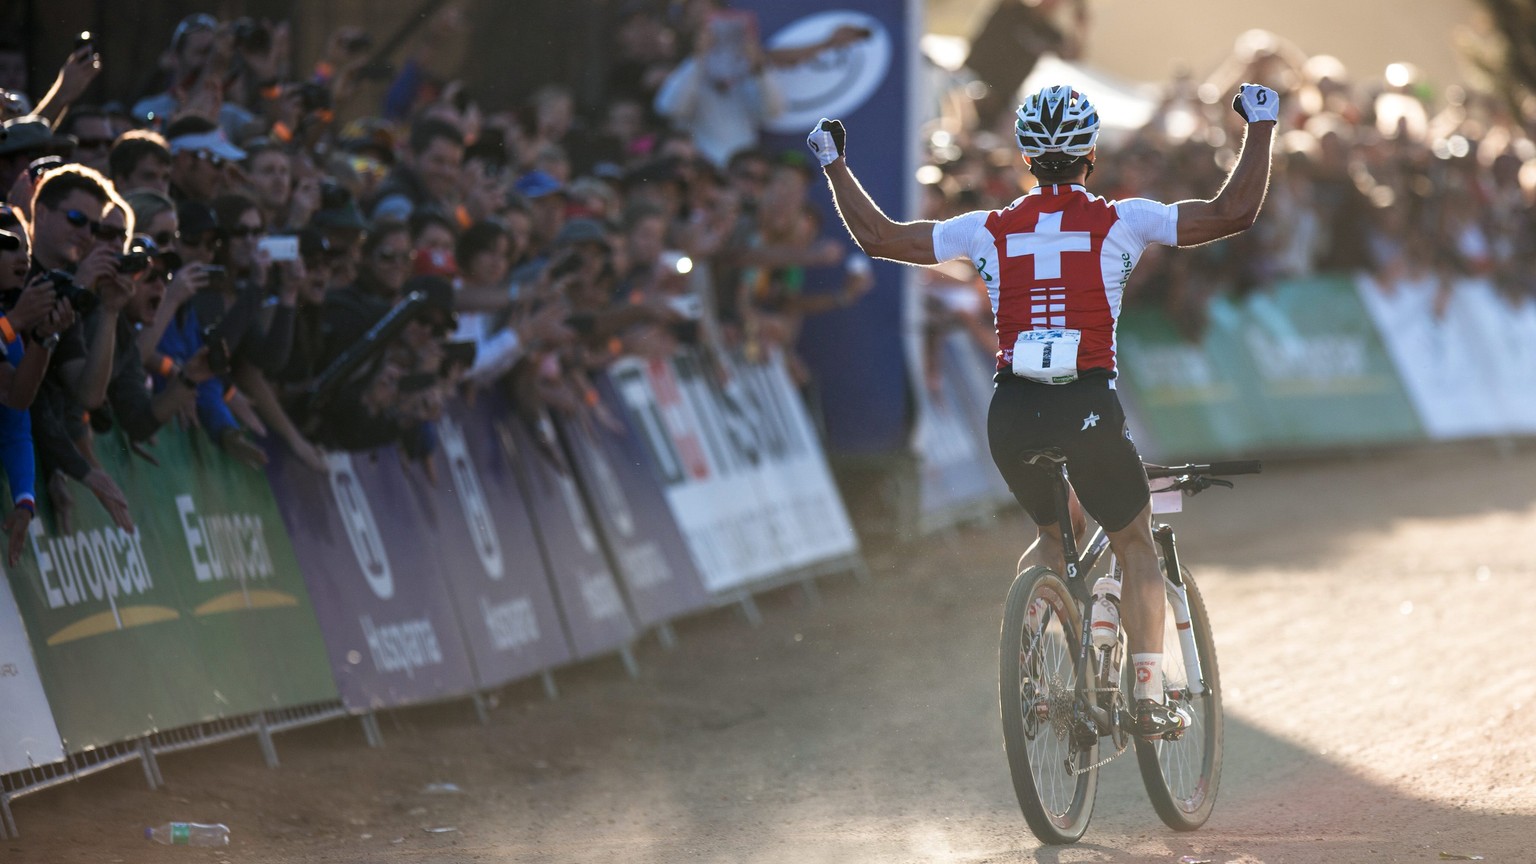 JAHRESRUECKBLICK 2013 - SPORT - Swiss cyclist and new World Champion Nino Schurter crosses the finish line to reach the first place of the Men Elite Cross-country race at the UCI Mountain Bike, MTB, W ...